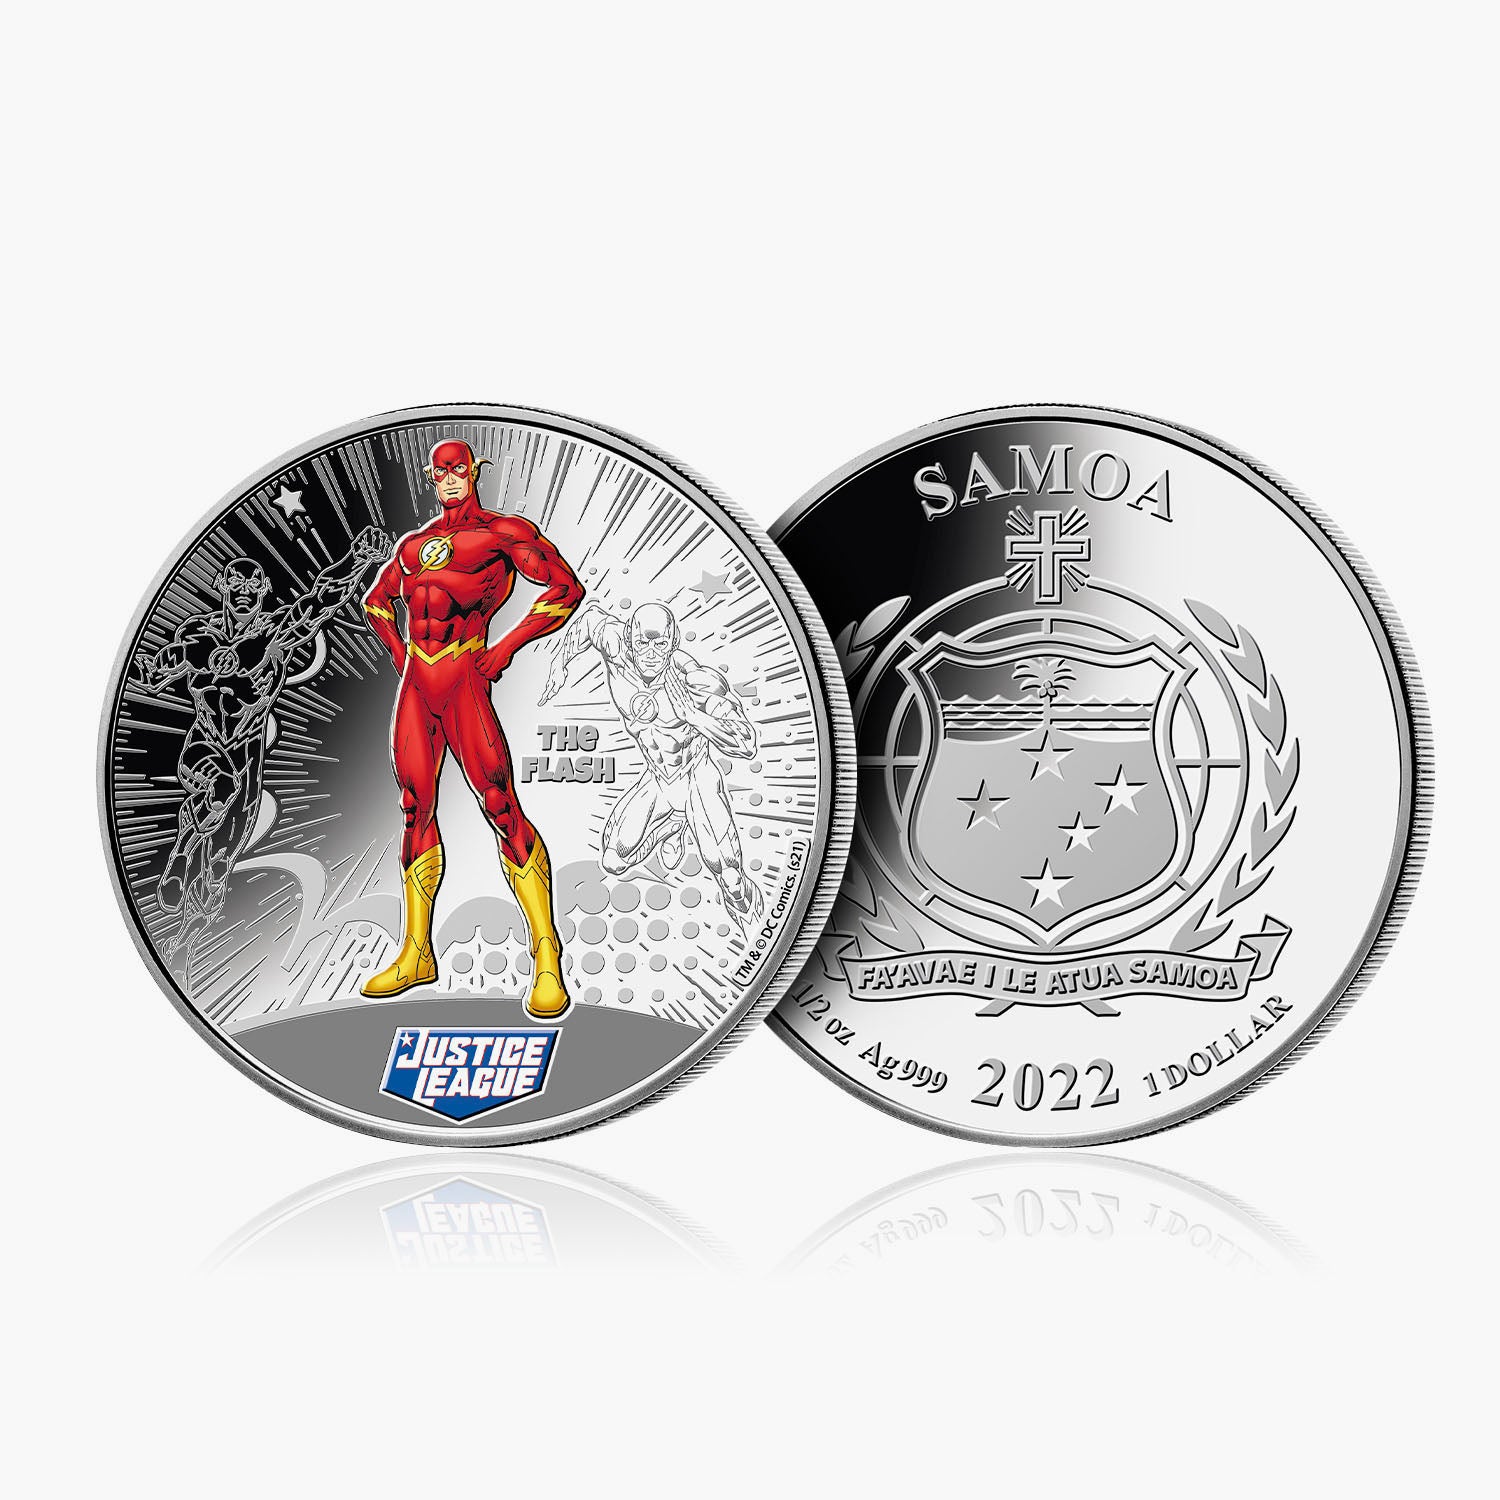 Justice League - The Flash 1/2oz Silver Coin